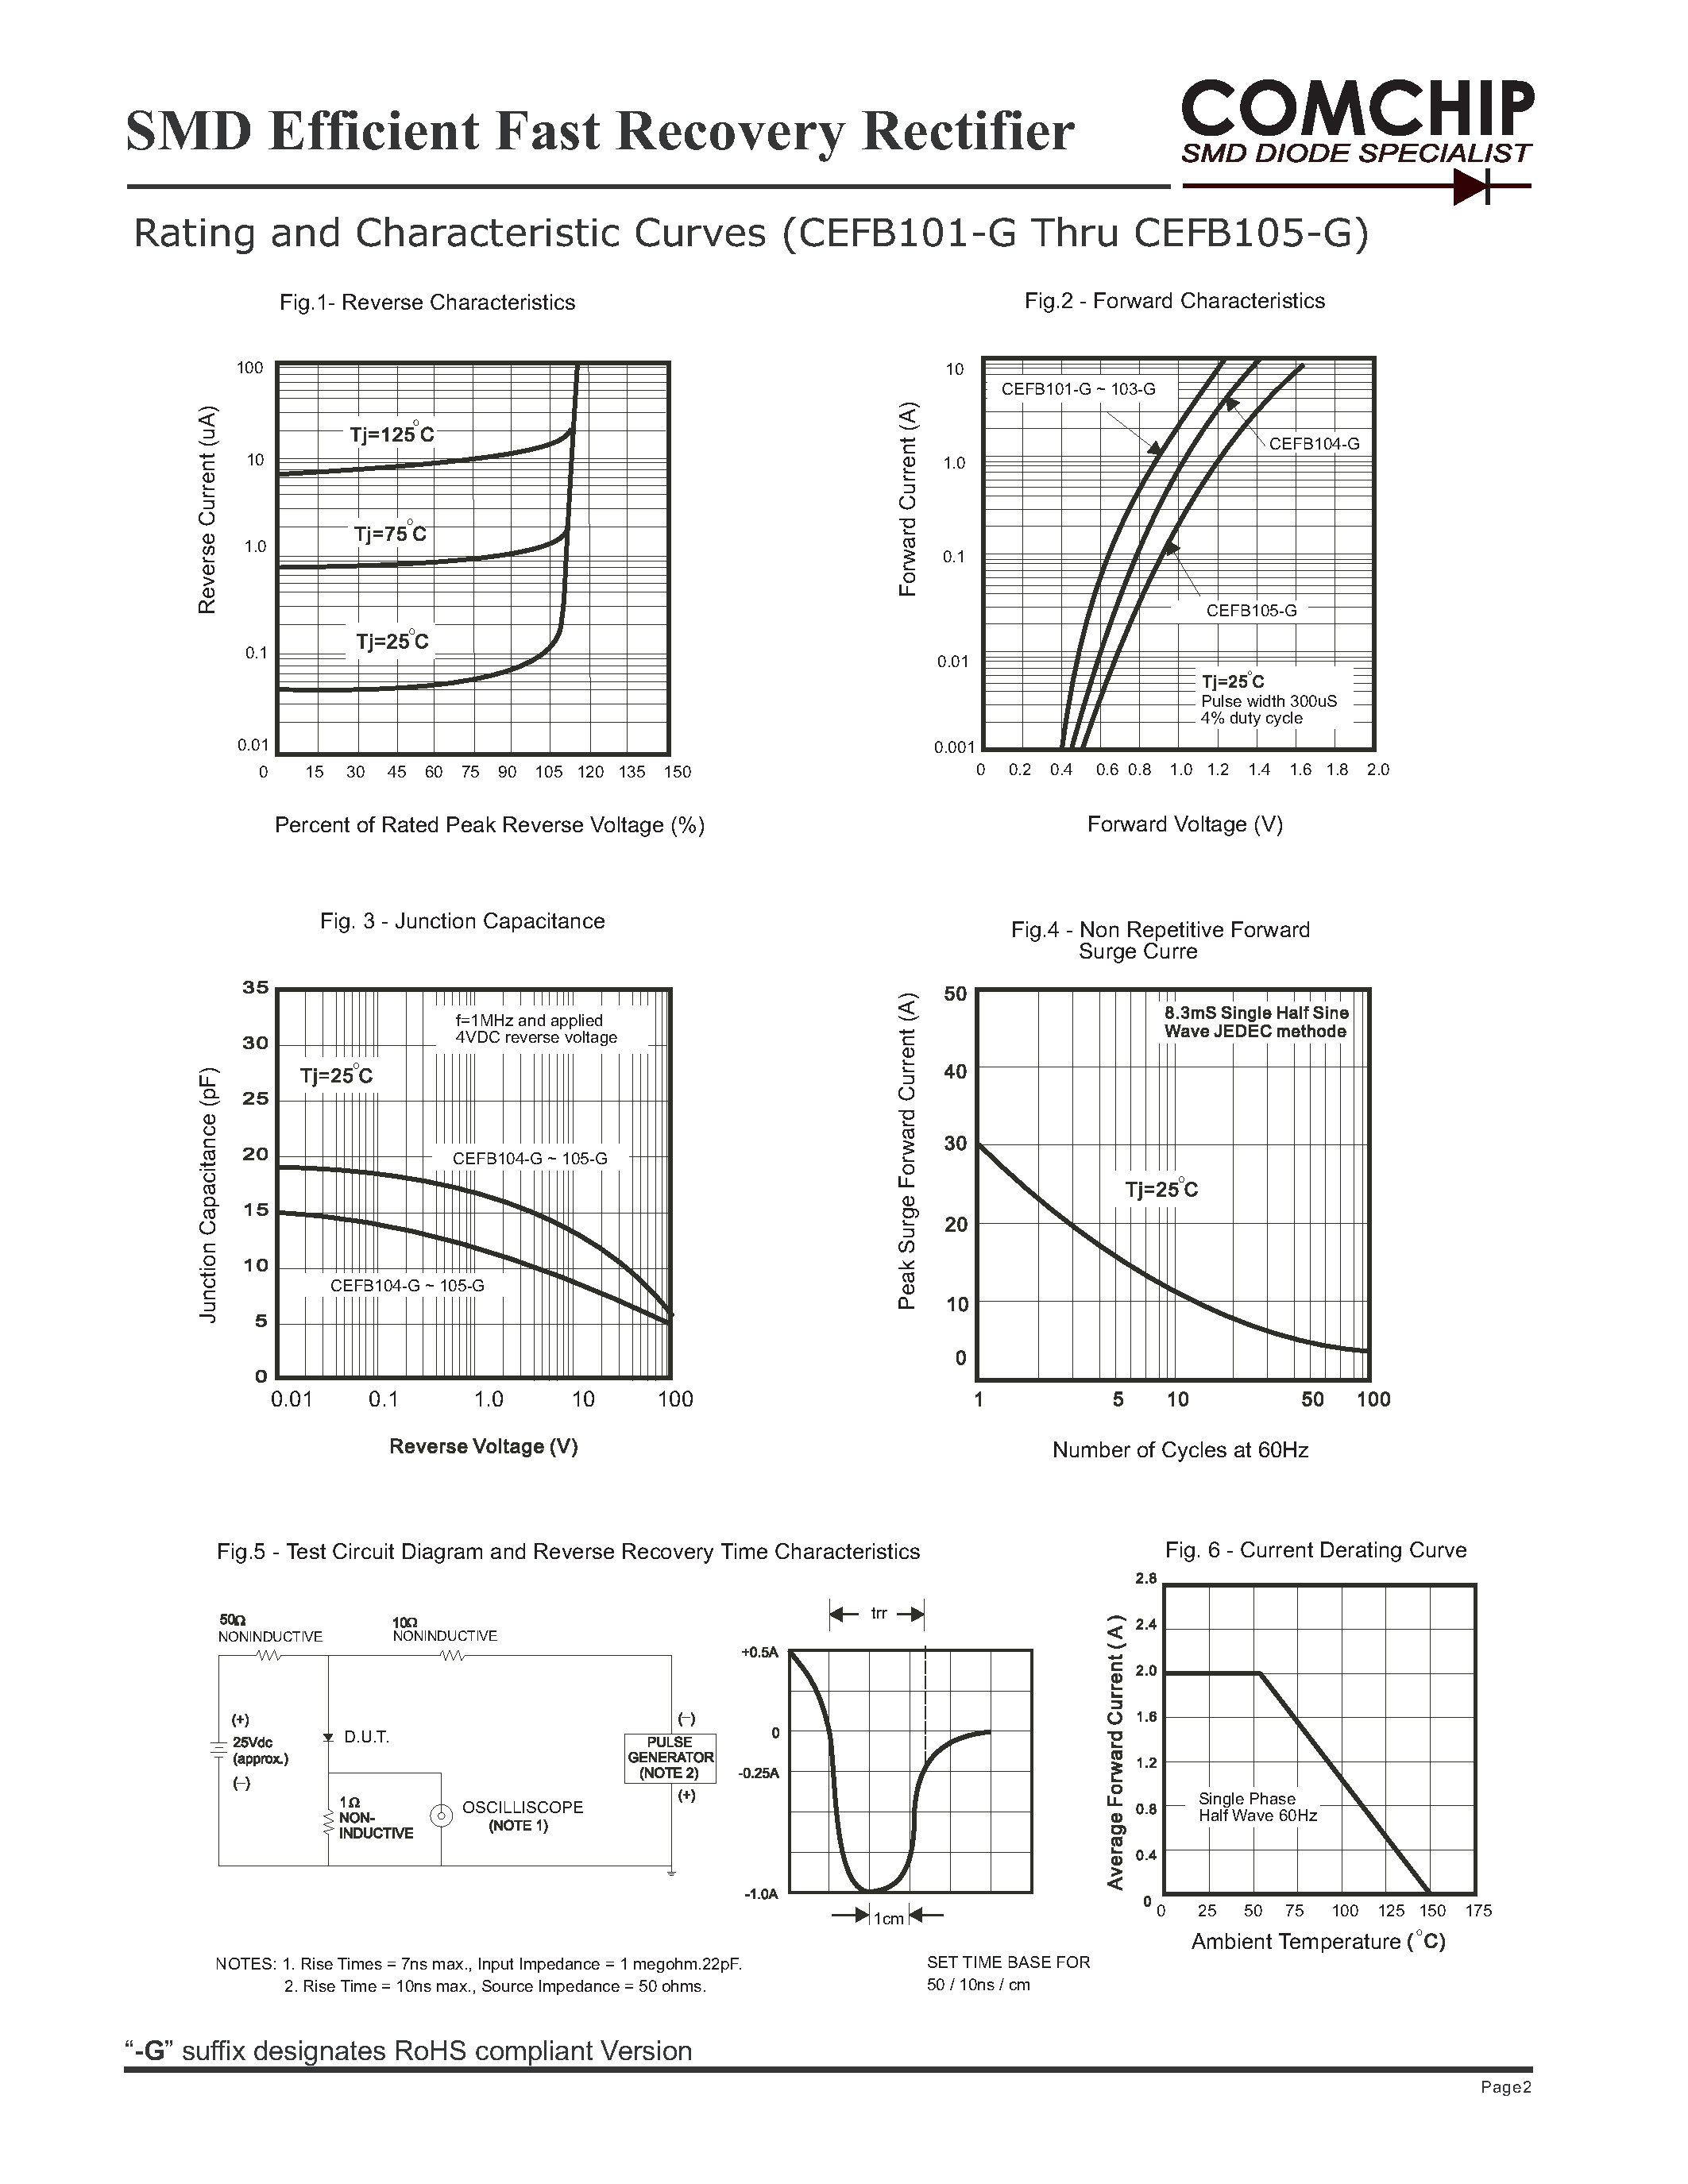 Datasheet CEFB101-G - (CEFB101-G - CEFB105-G) SMD Efficient Fast Recovery Rectifier page 2